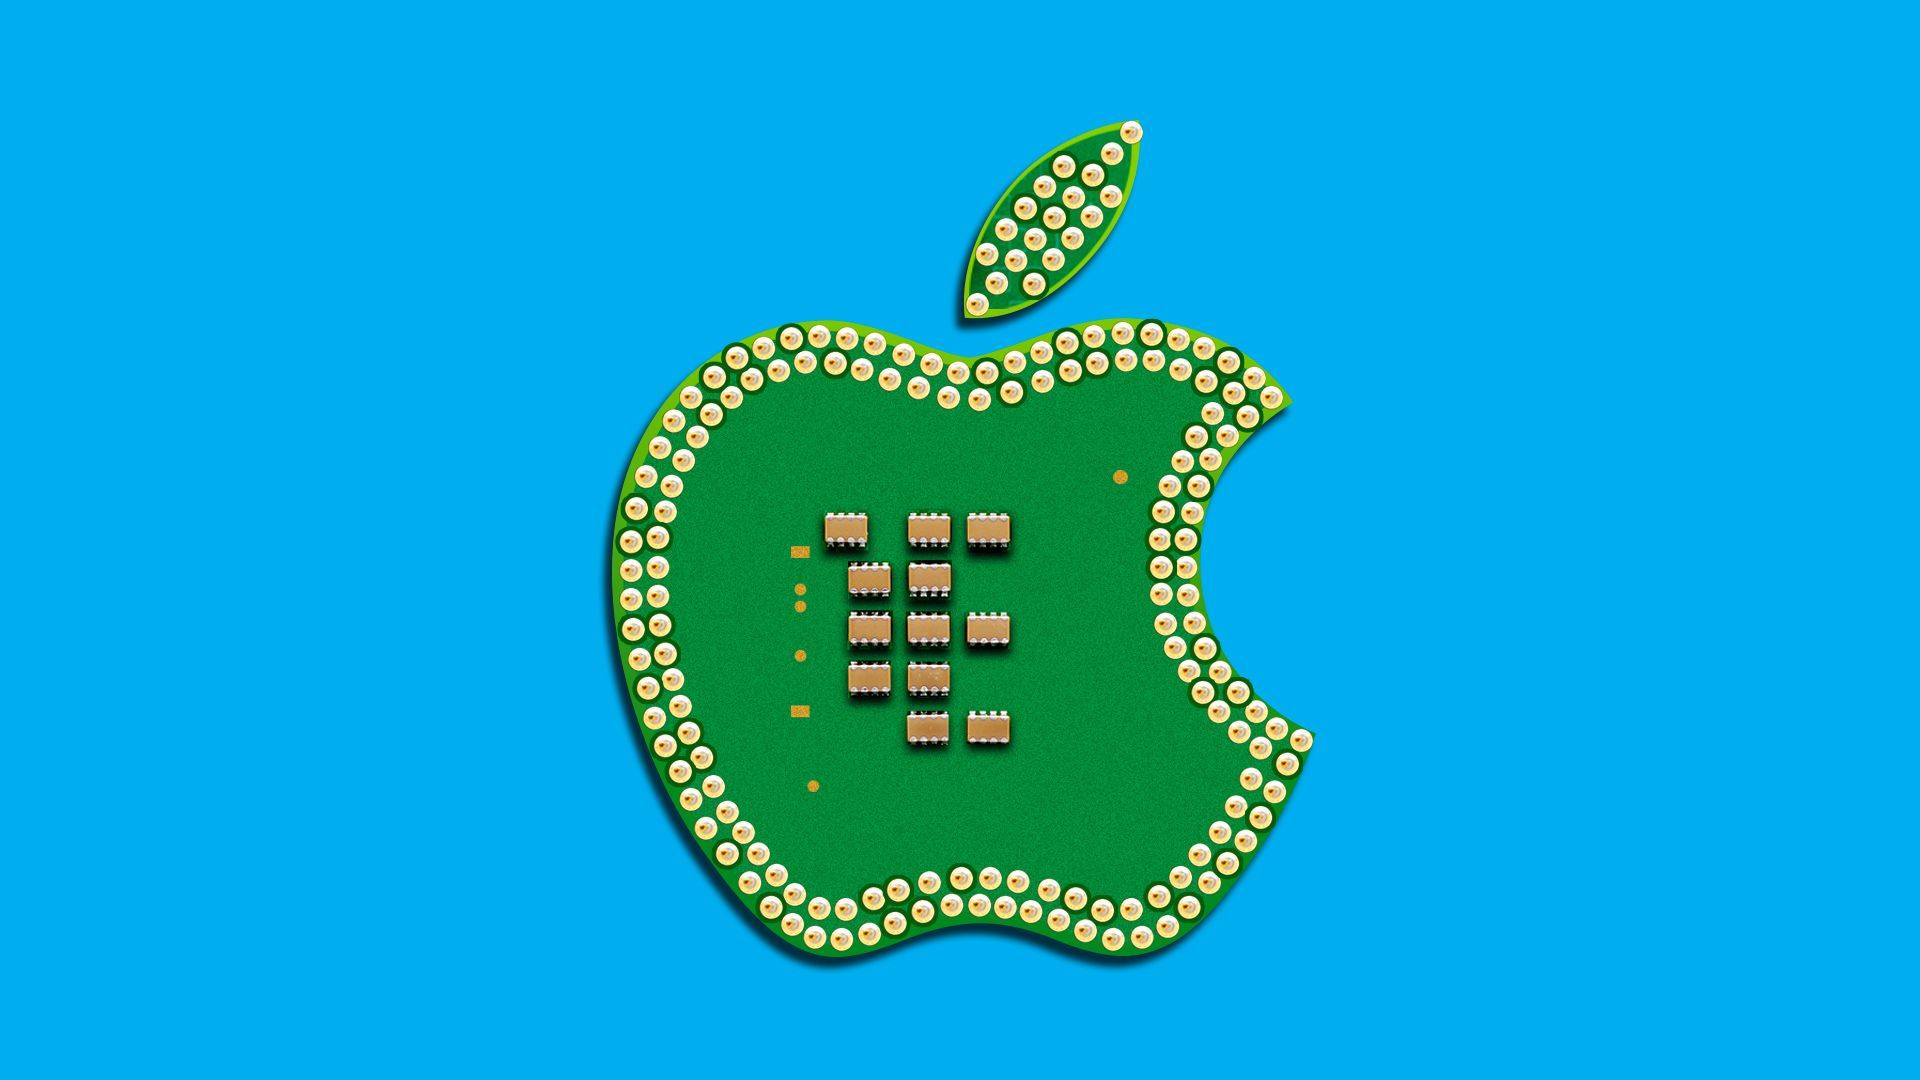 Illustration of the Apple logo made out of a computer chip. 